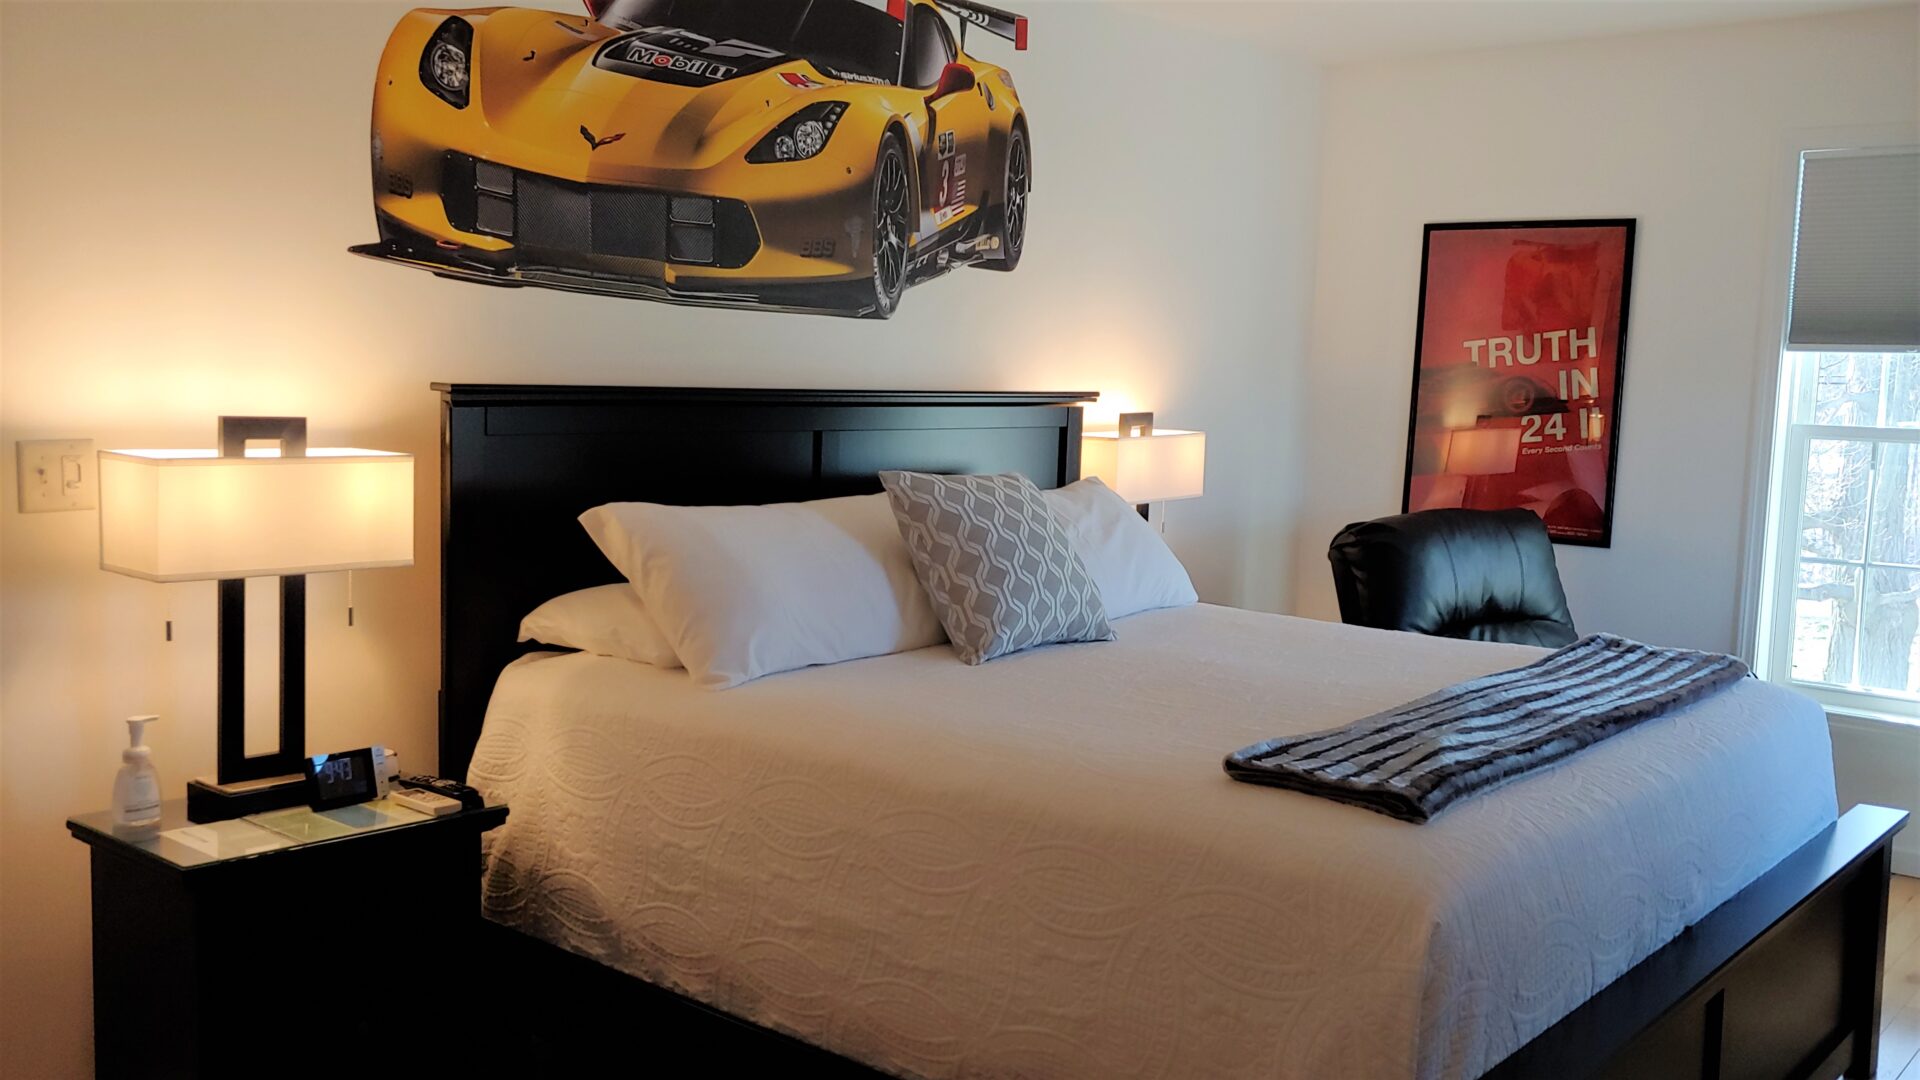 Our King Room Turn 1 with nightstands and lamps with USB ports clock and sound machine